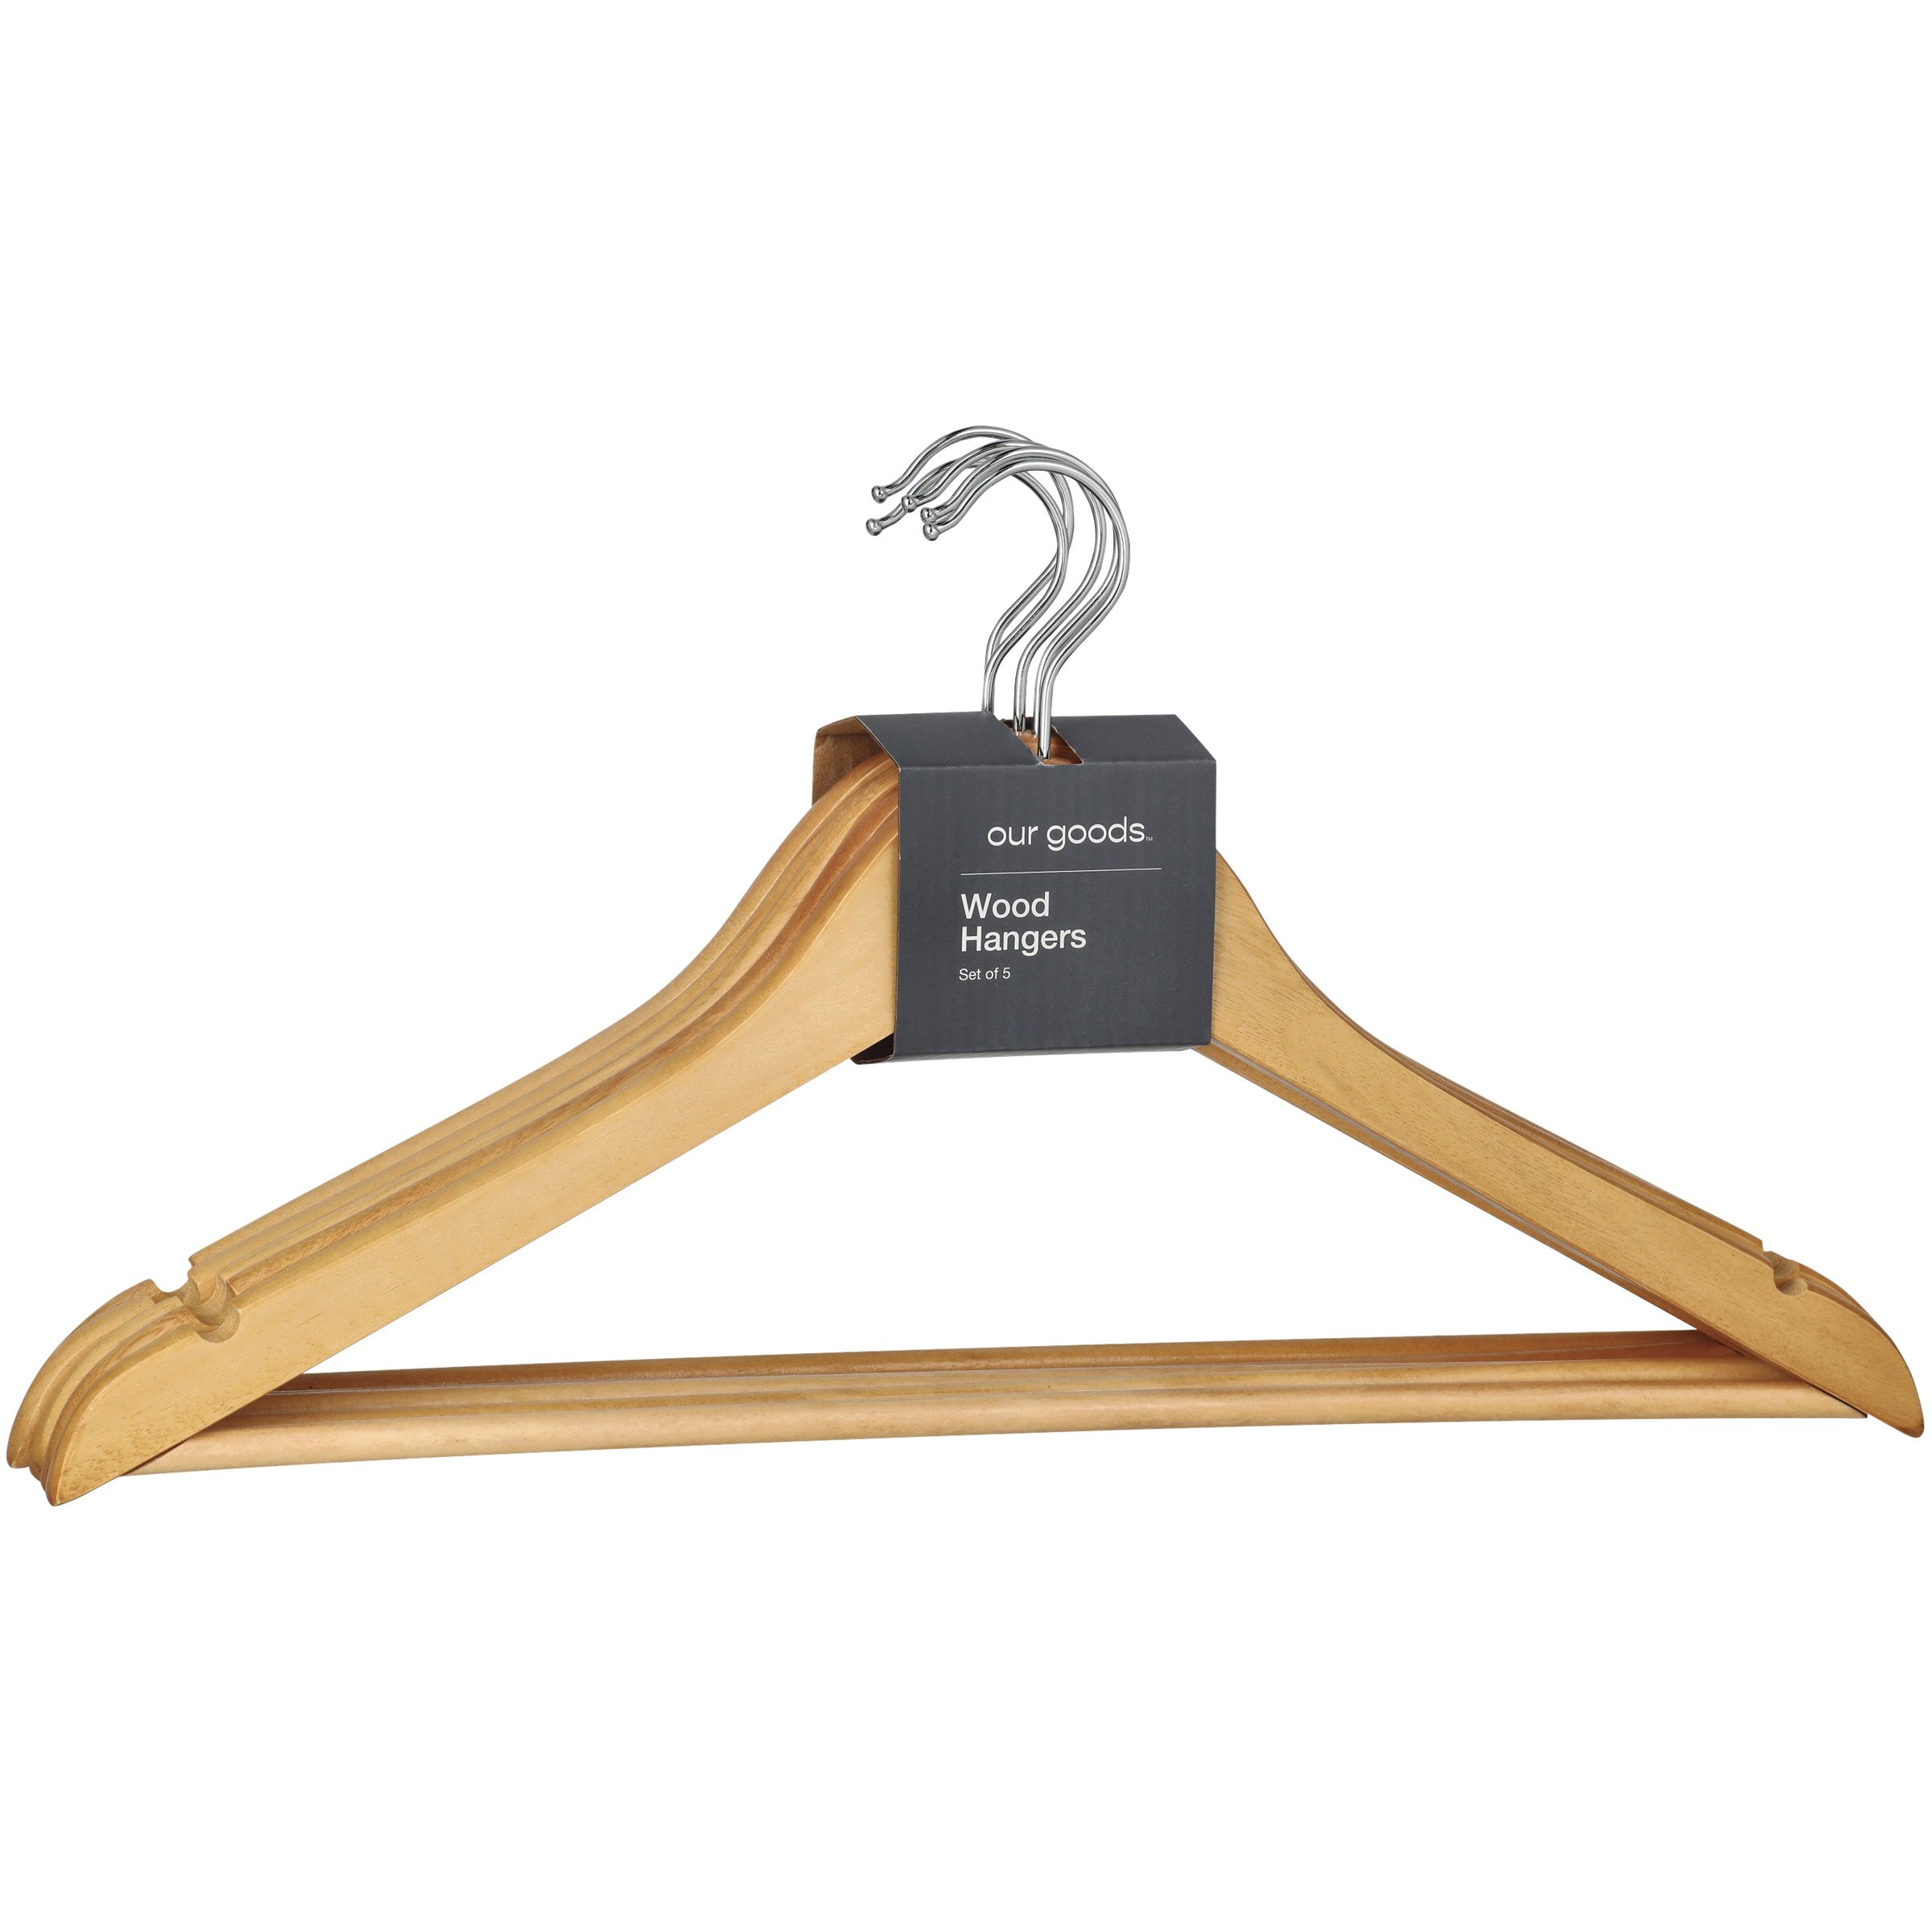 our goods Wood Hangers